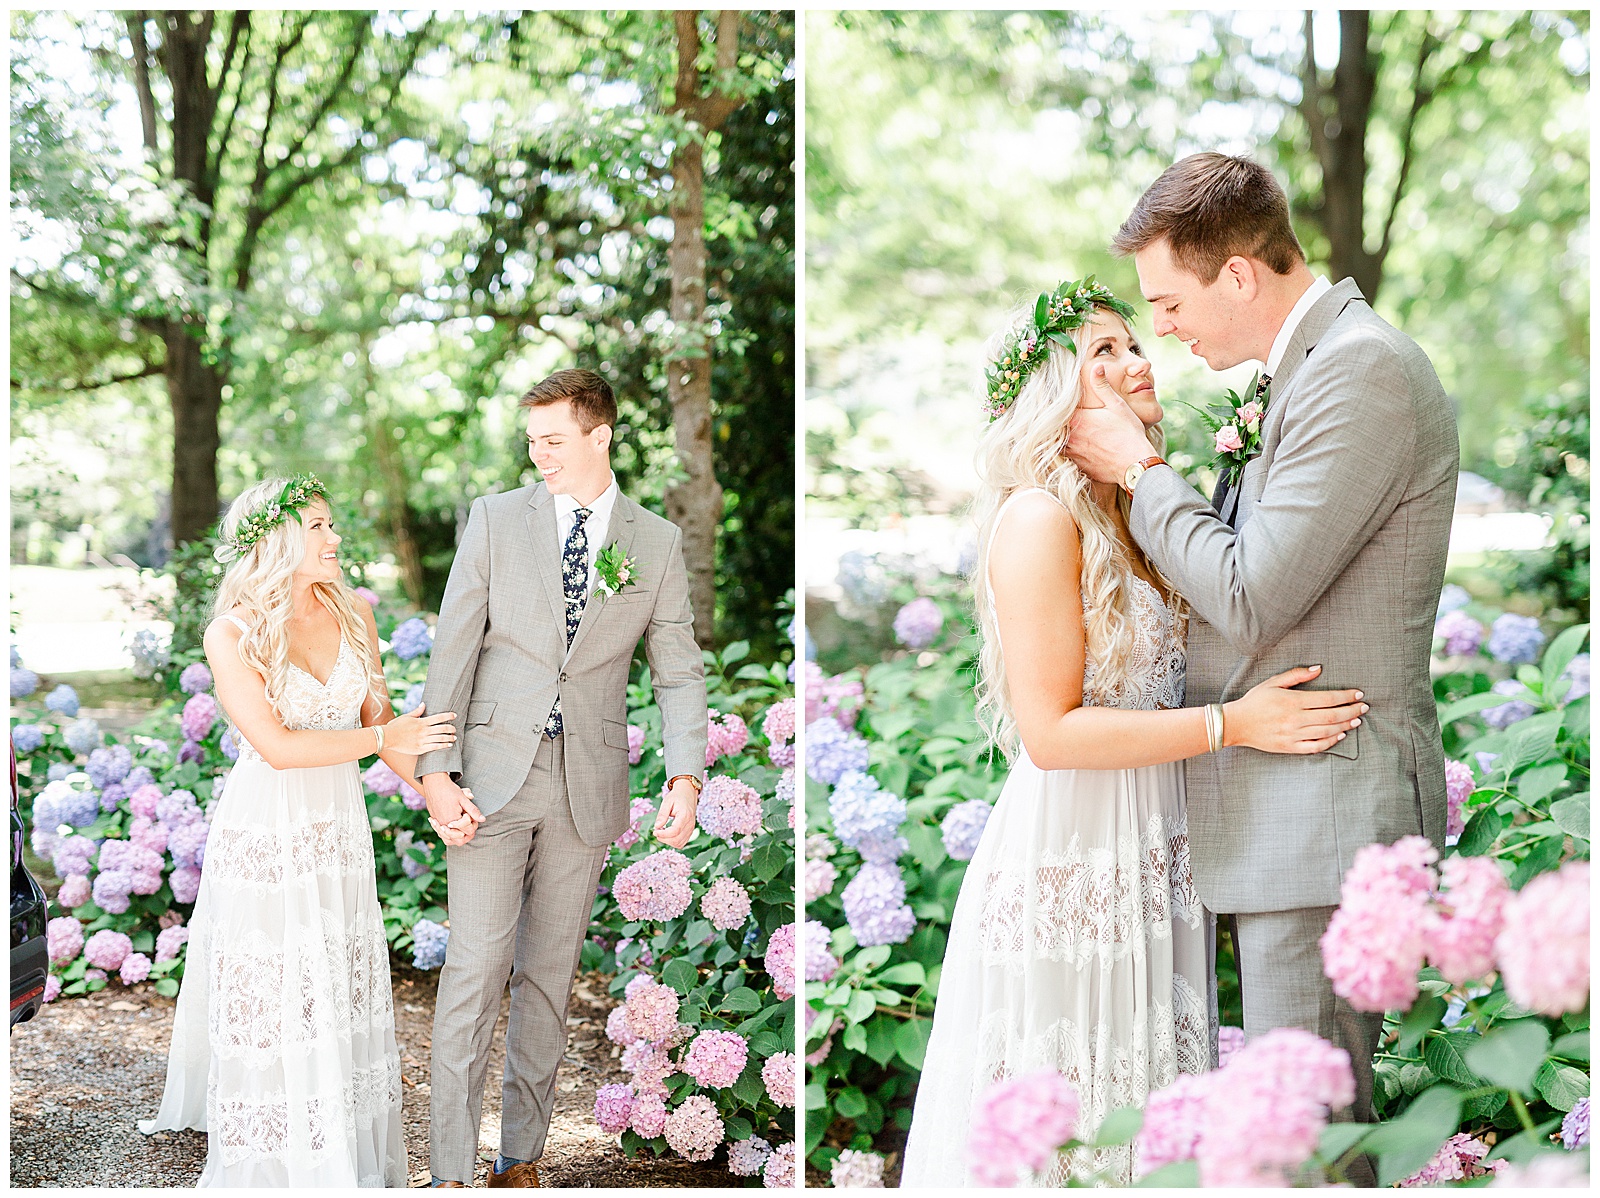 Enchanting Bohemian Flower Garden Portraits of Bride and Groom from Boho Chic Wedding in Charlotte, NC | check out the full wedding at KevynDixonPhoto.com